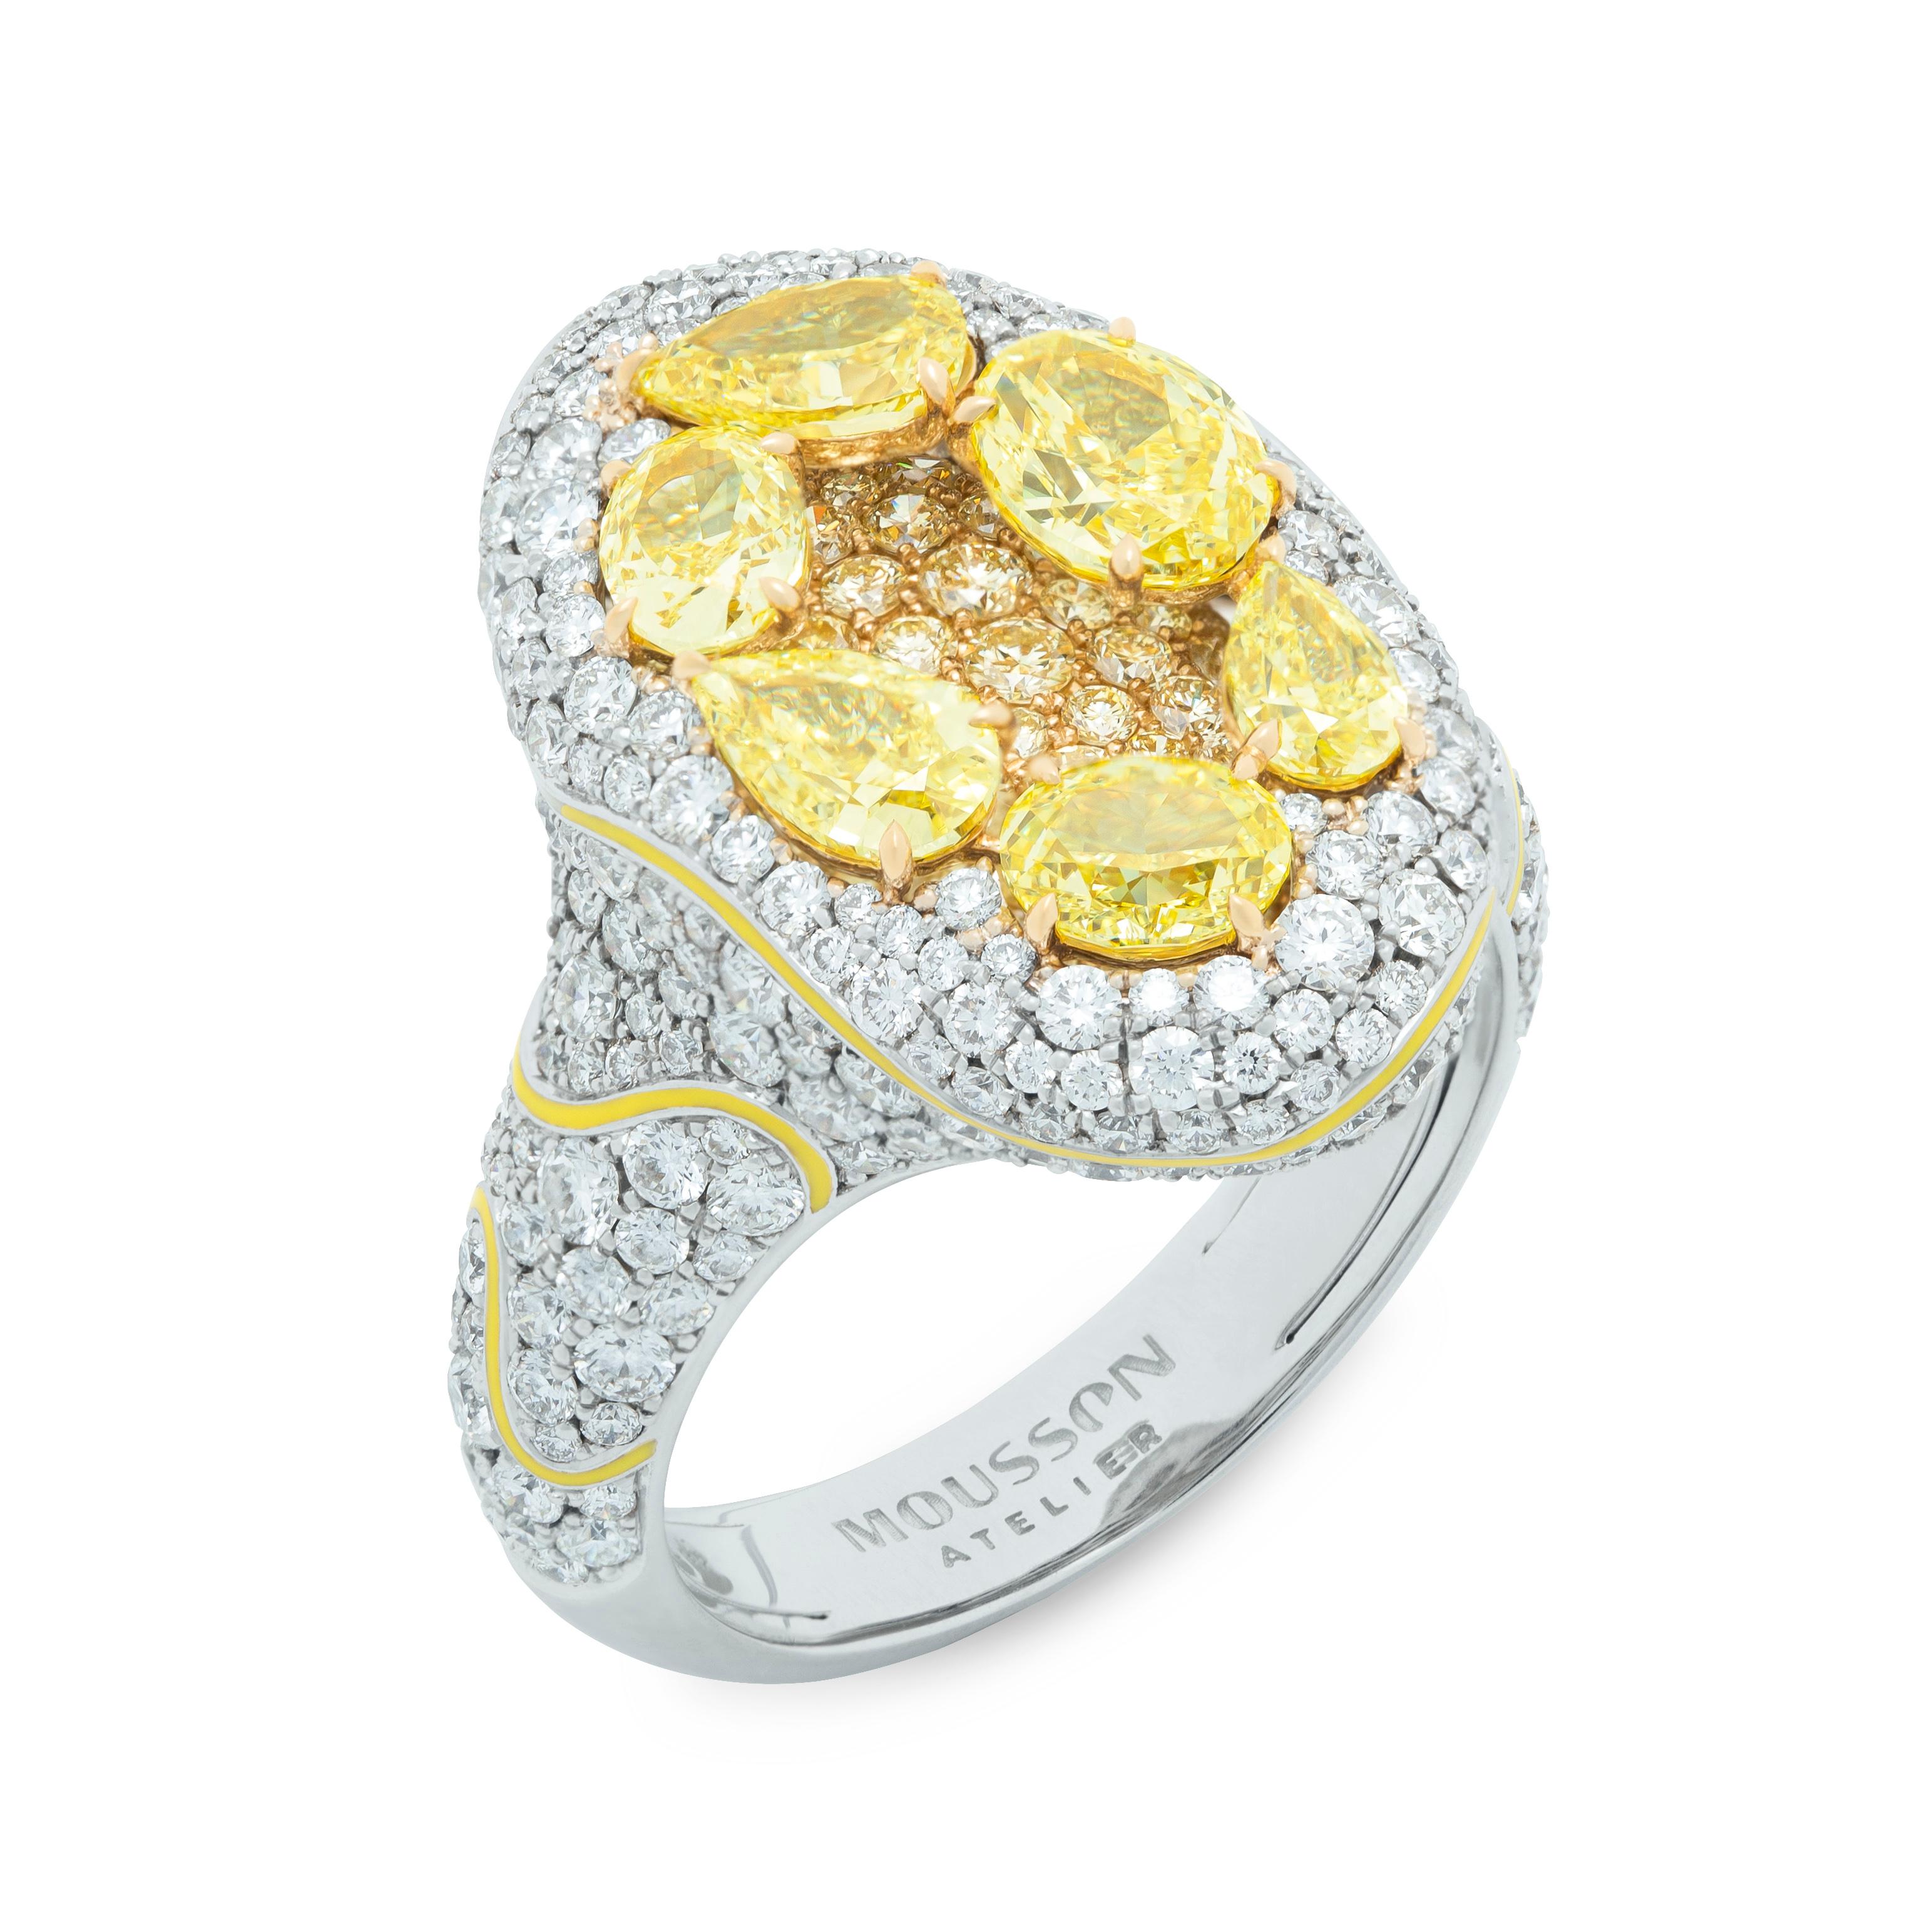 Yellow Diamonds White Diamonds Enamel 18 Karat White Gold High Jewellry Suite

This 18K White Gold, Enamel, Yellow Diamonds, and Diamonds Suite is a stunning addition to any jewelry collection. Central stones are set as the base of the ring - an